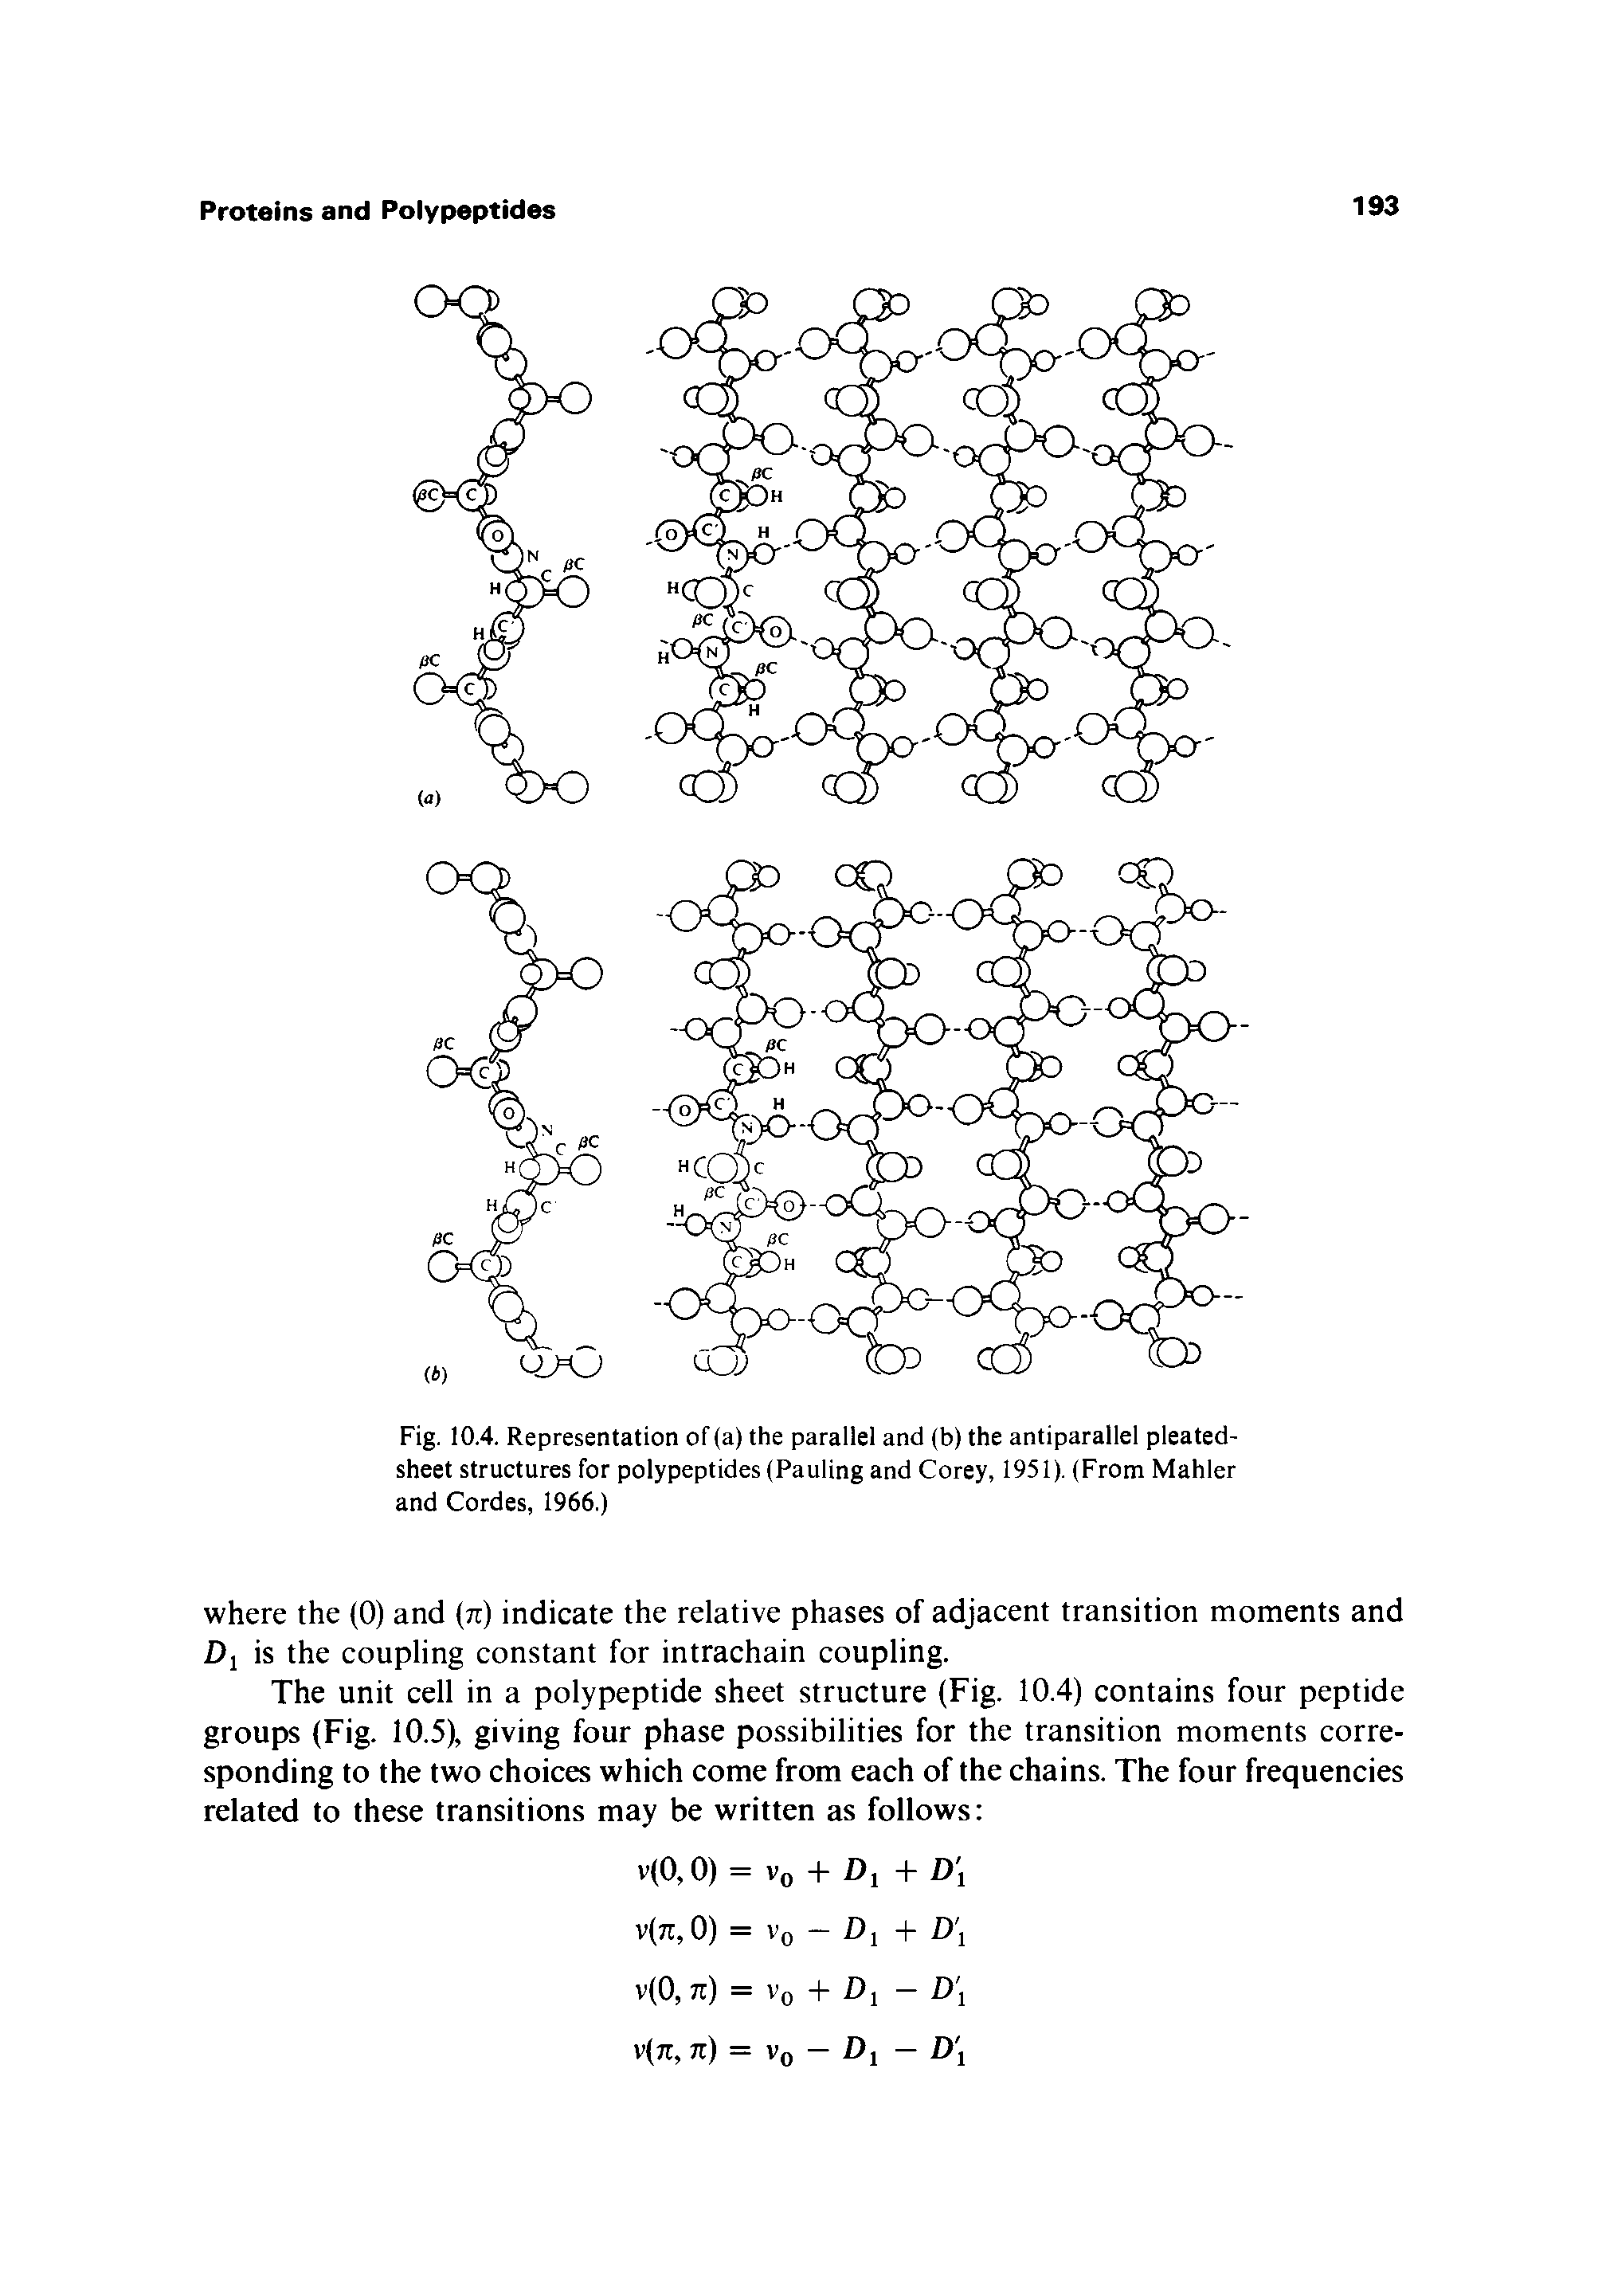 Fig. 10.4. Representation of (a) the parallel and (b) the antiparallel pleated-sheet structures for polypeptides (Pauling and Corey, 1951). (From Mahler and Cordes, 1966.)...